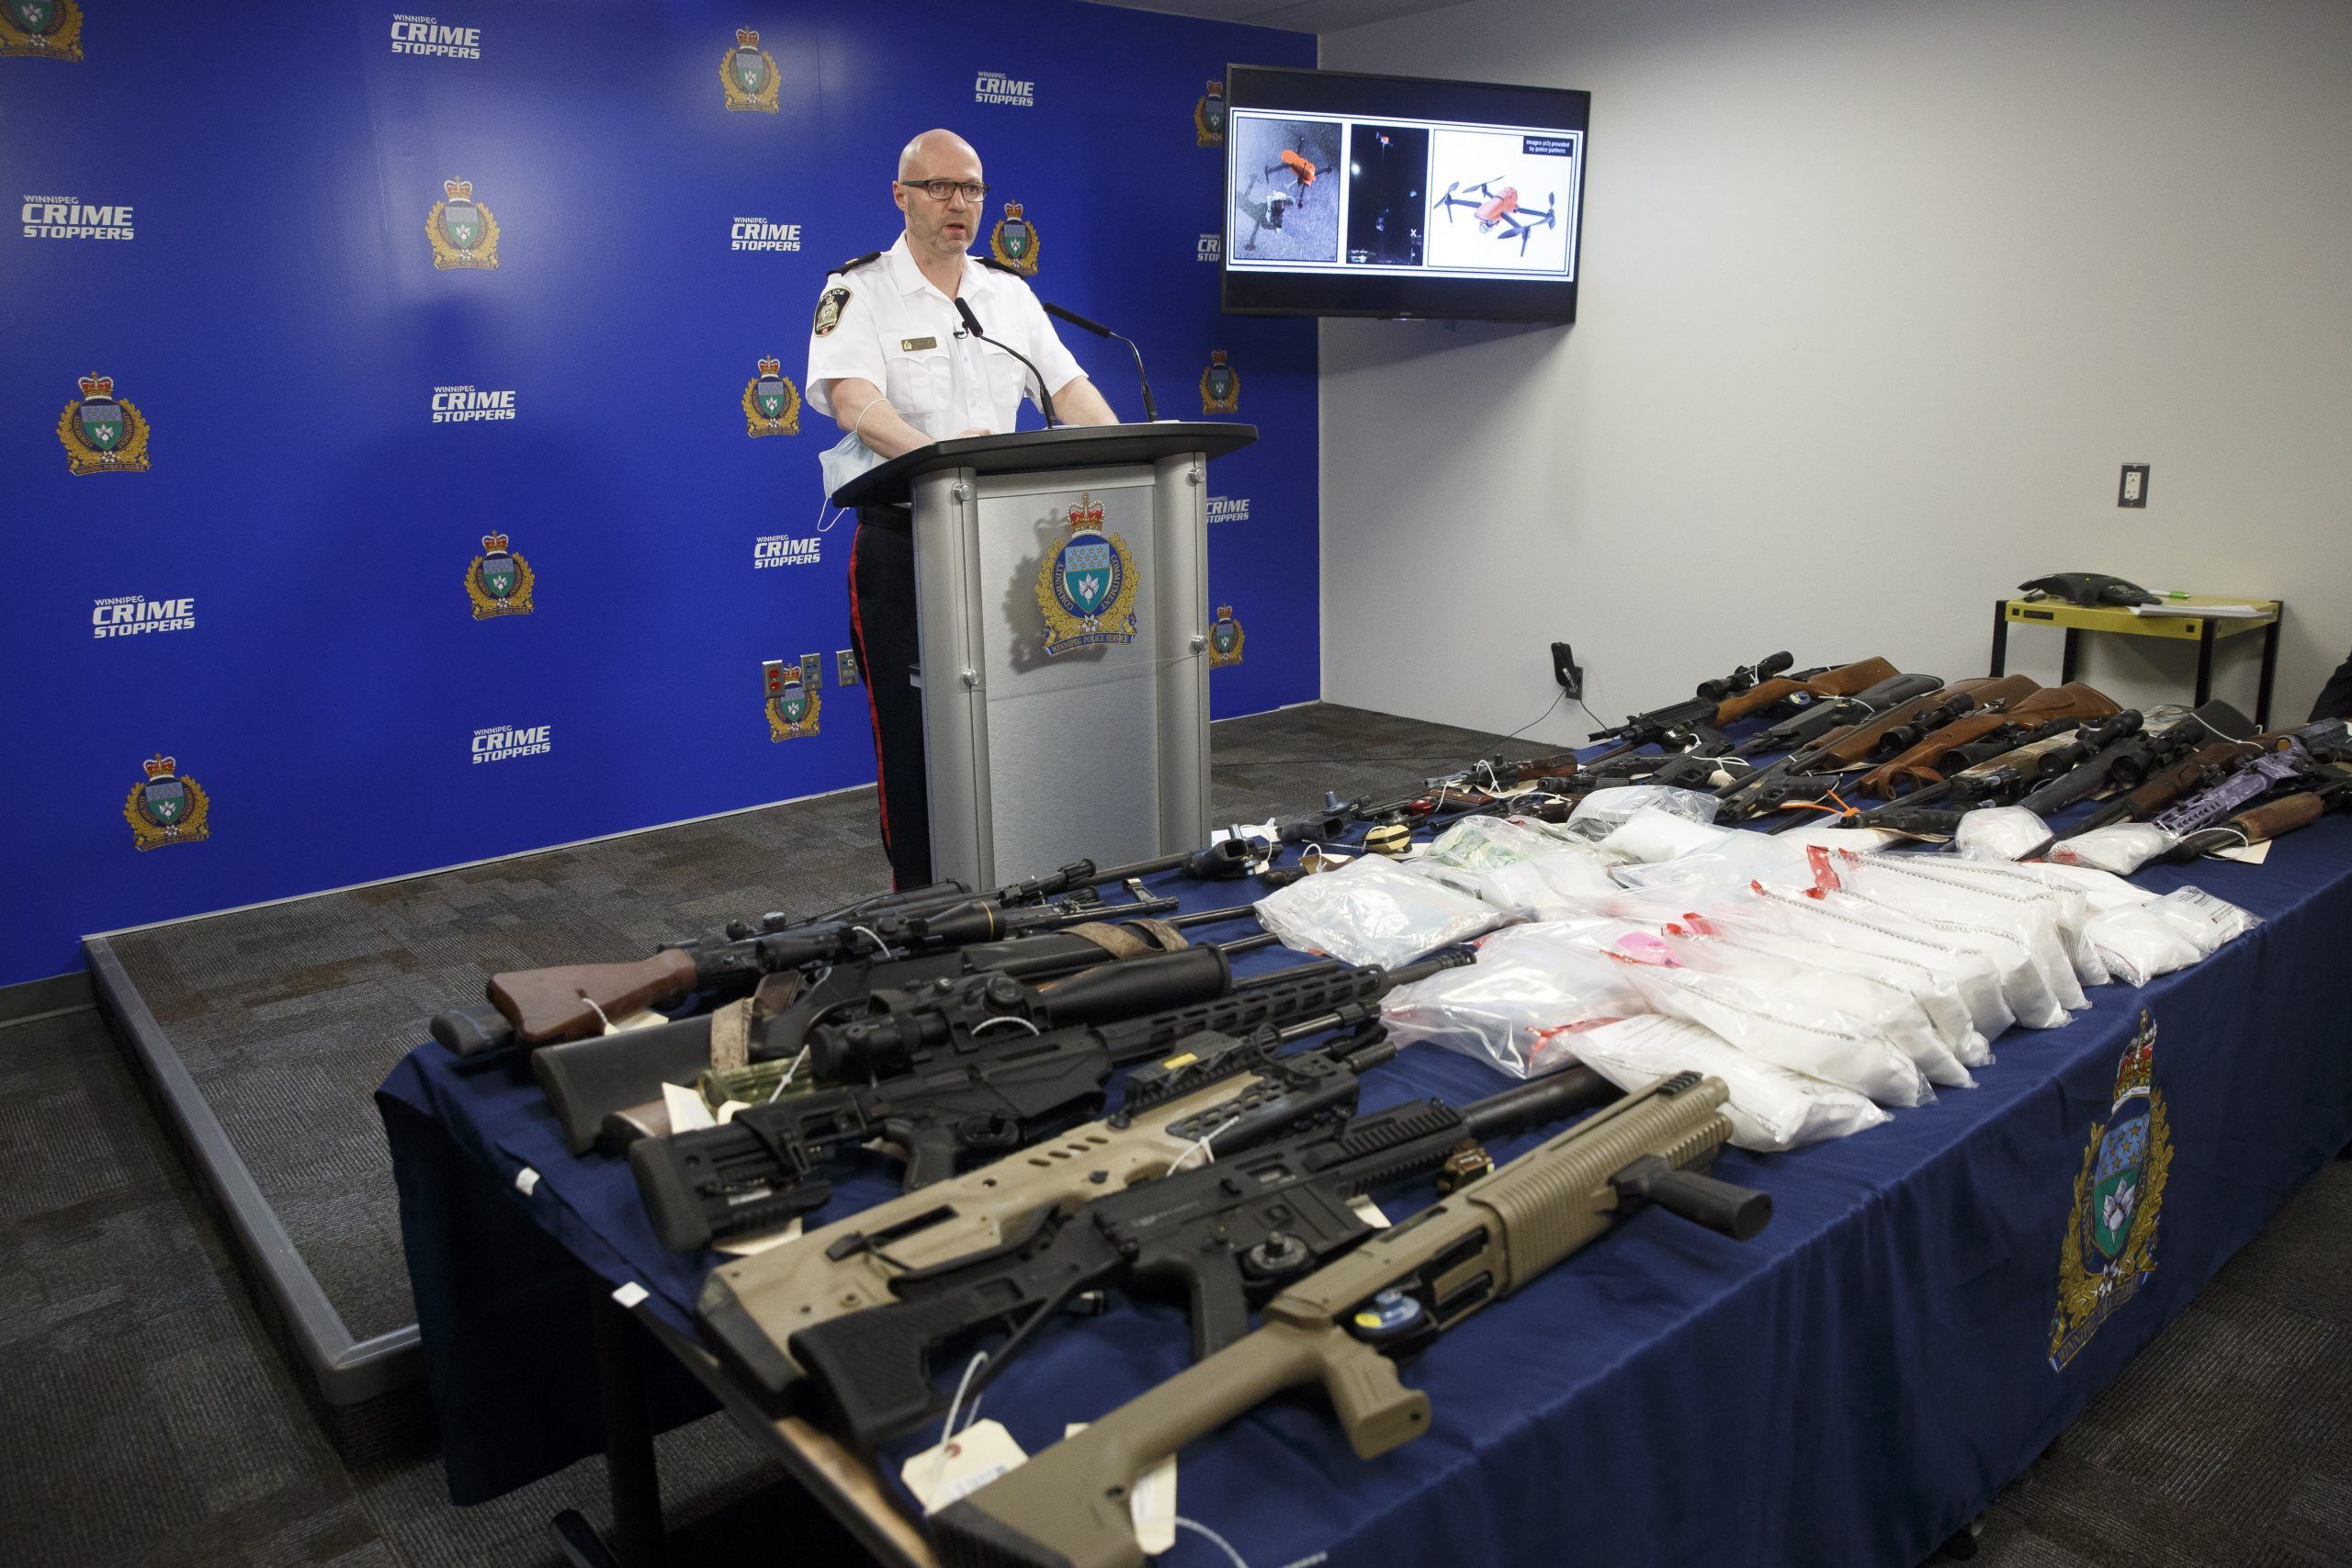 Winnipeg Police Inspector Elton Hall of the Organized Crime Unit speaks about Operation Phoenix during a press conference at Winnipeg Police Headquarters Thursday morning. MIKE DEAL/POOL